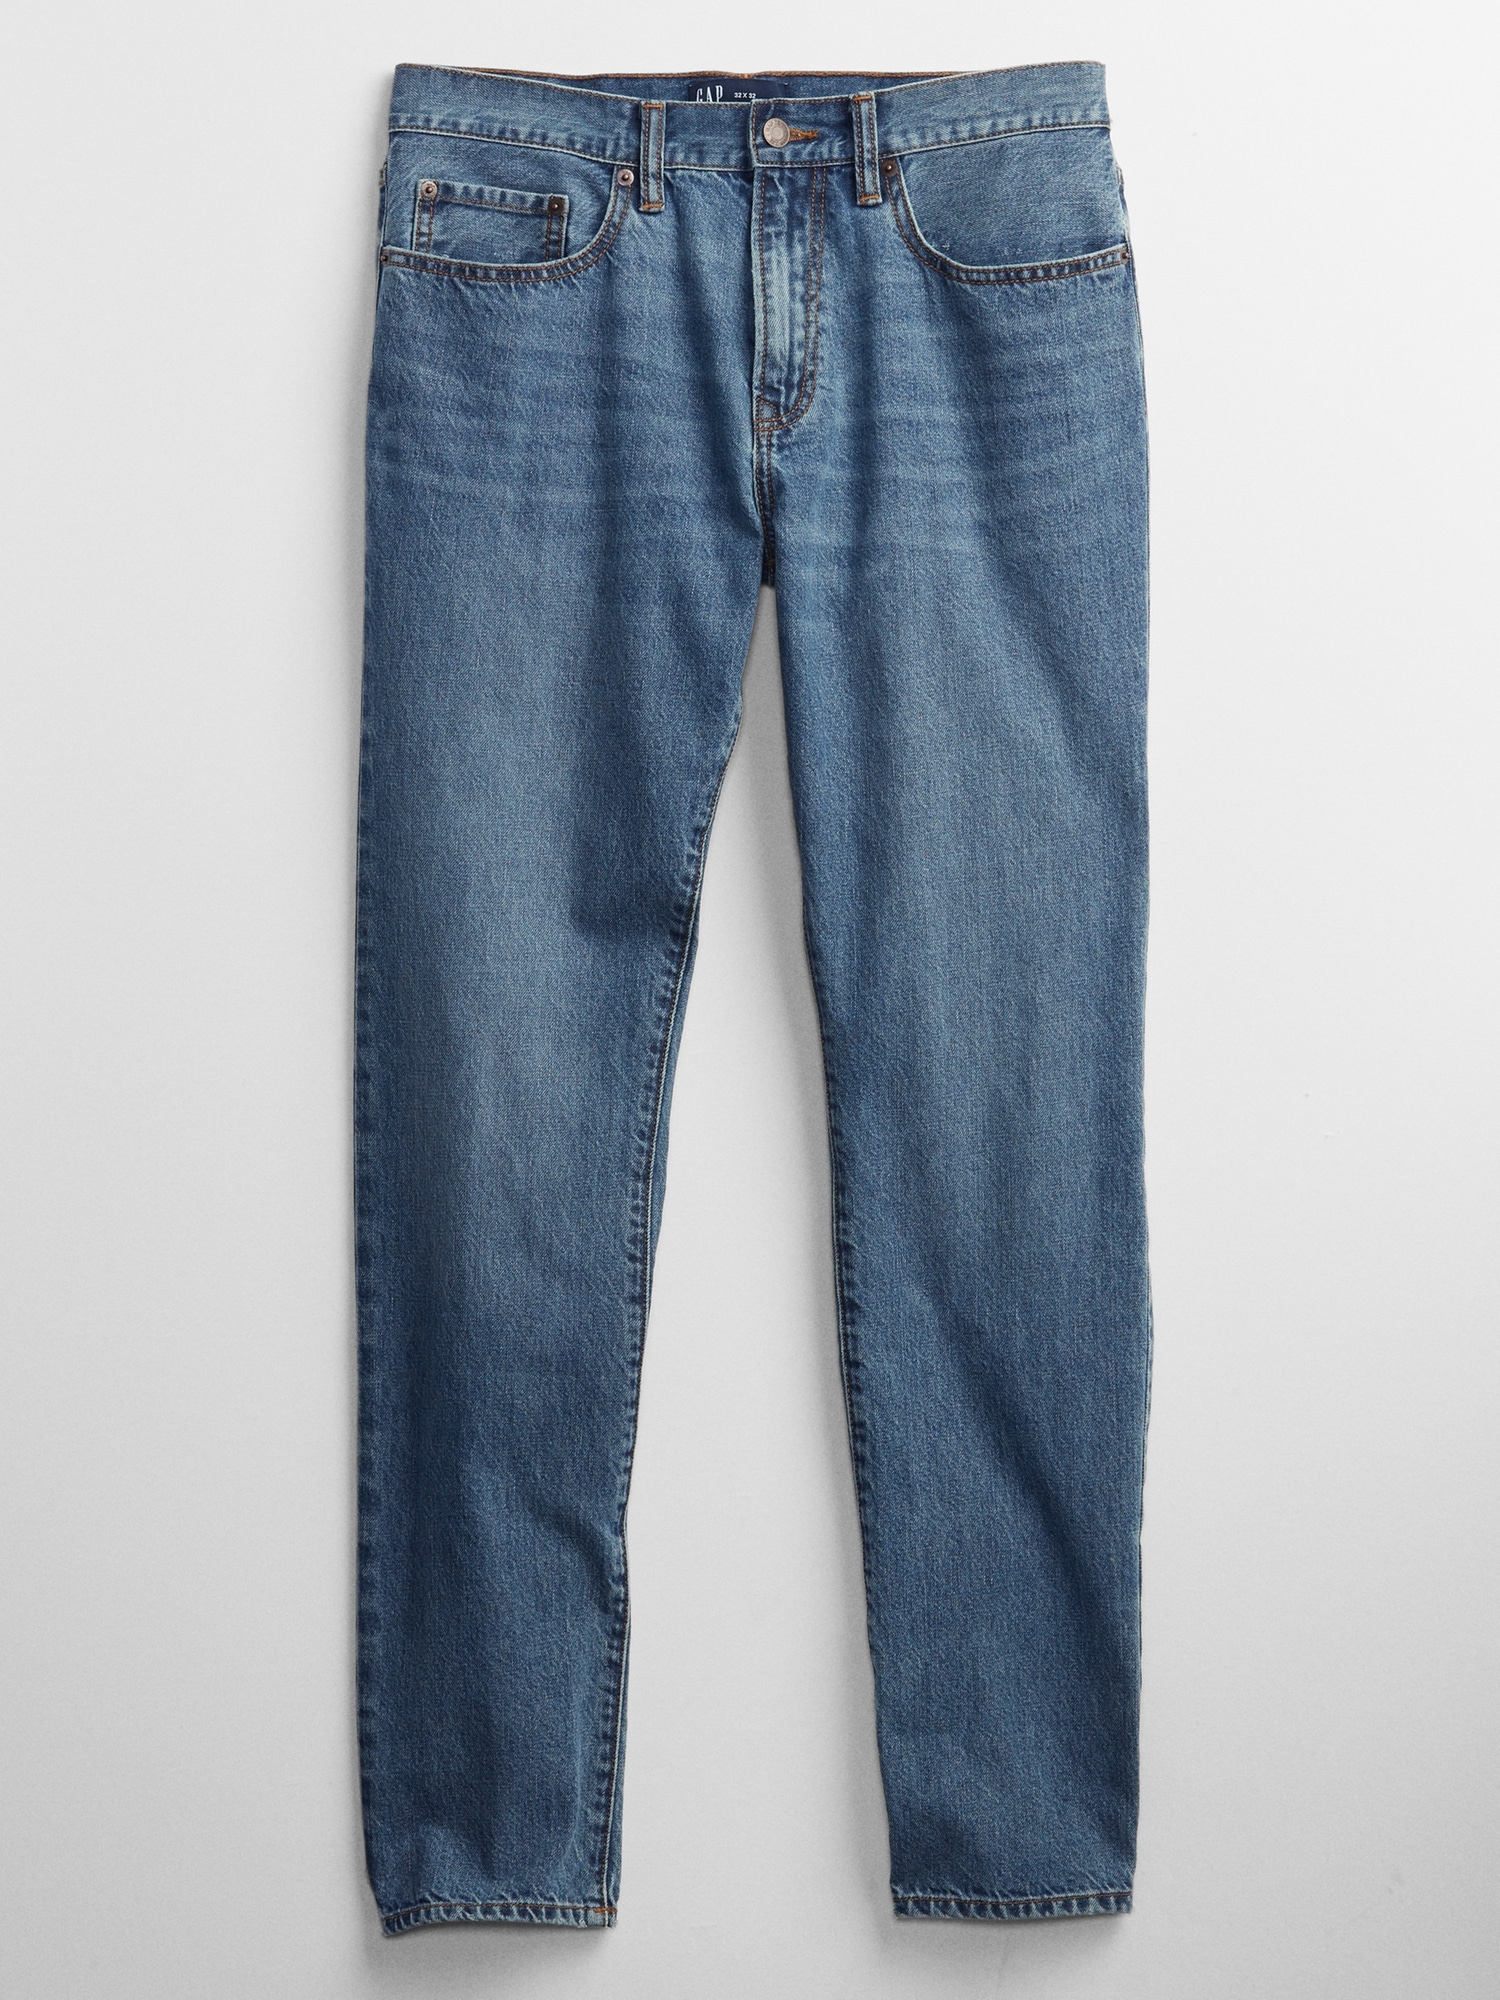 Mid Rise Slim Jeans with Washwell™ | Gap Factory